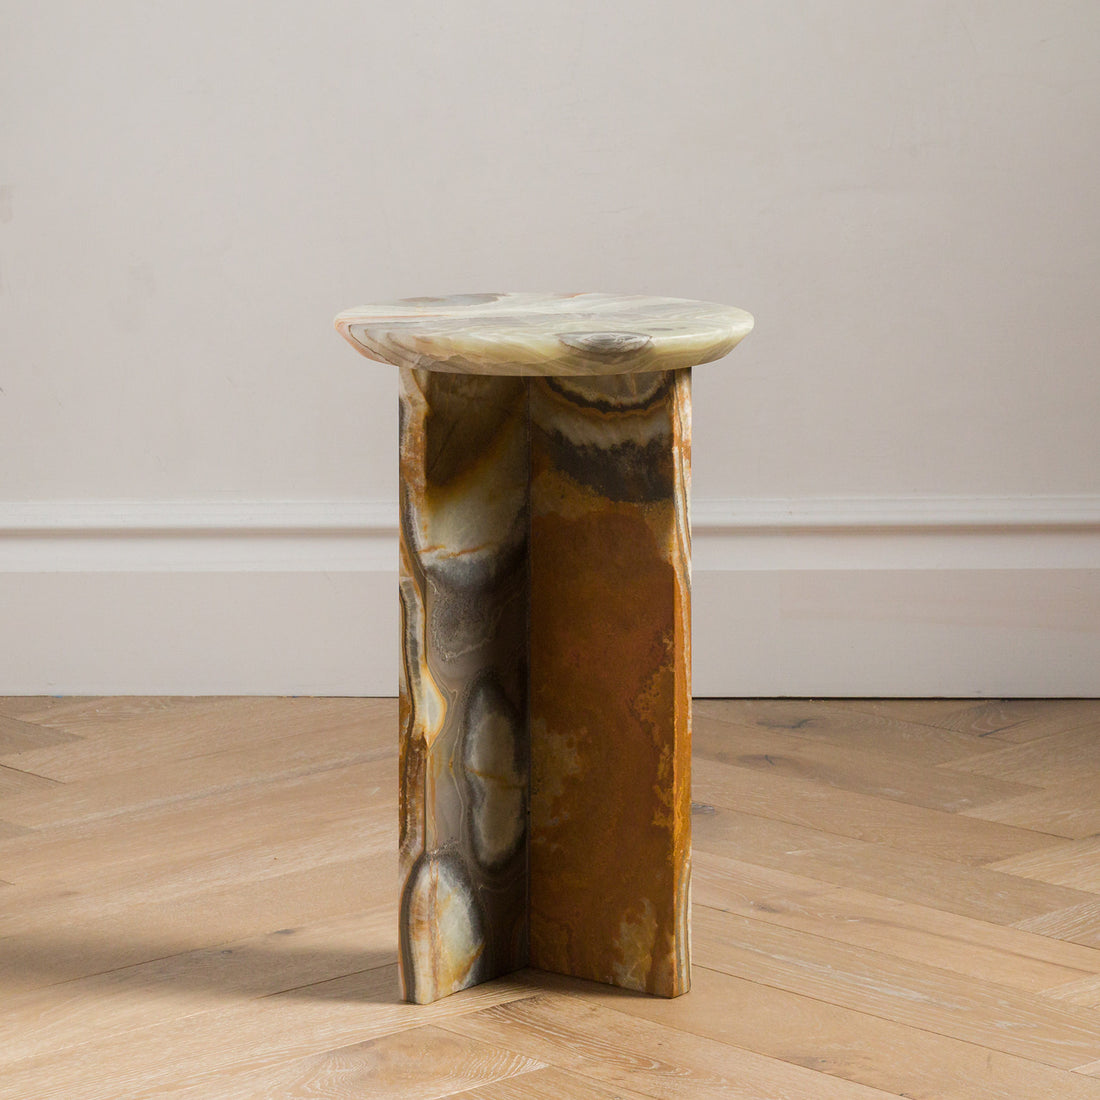 Green onyx stone side table